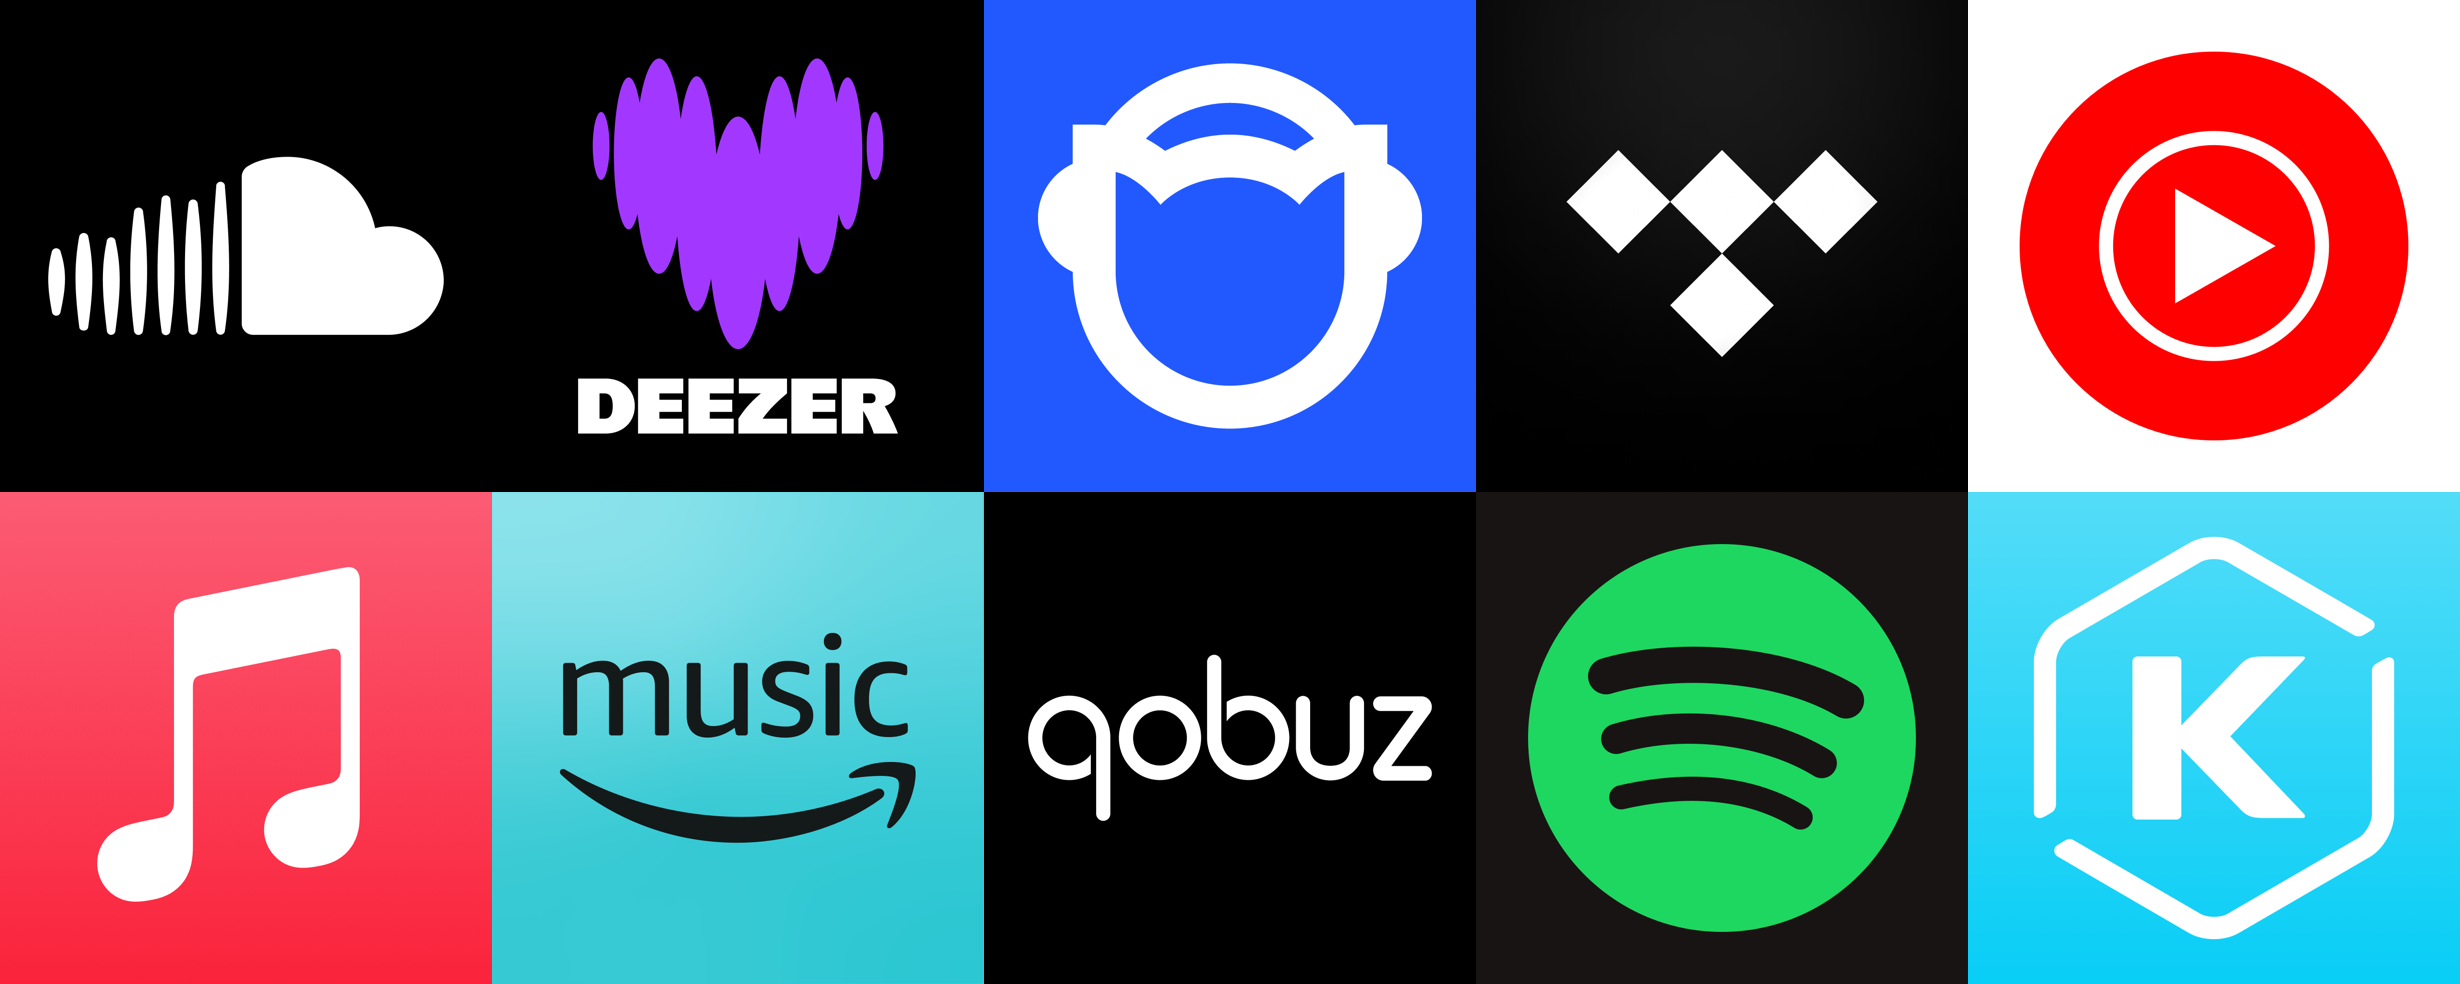 The icons of the streaming services with the most tracks